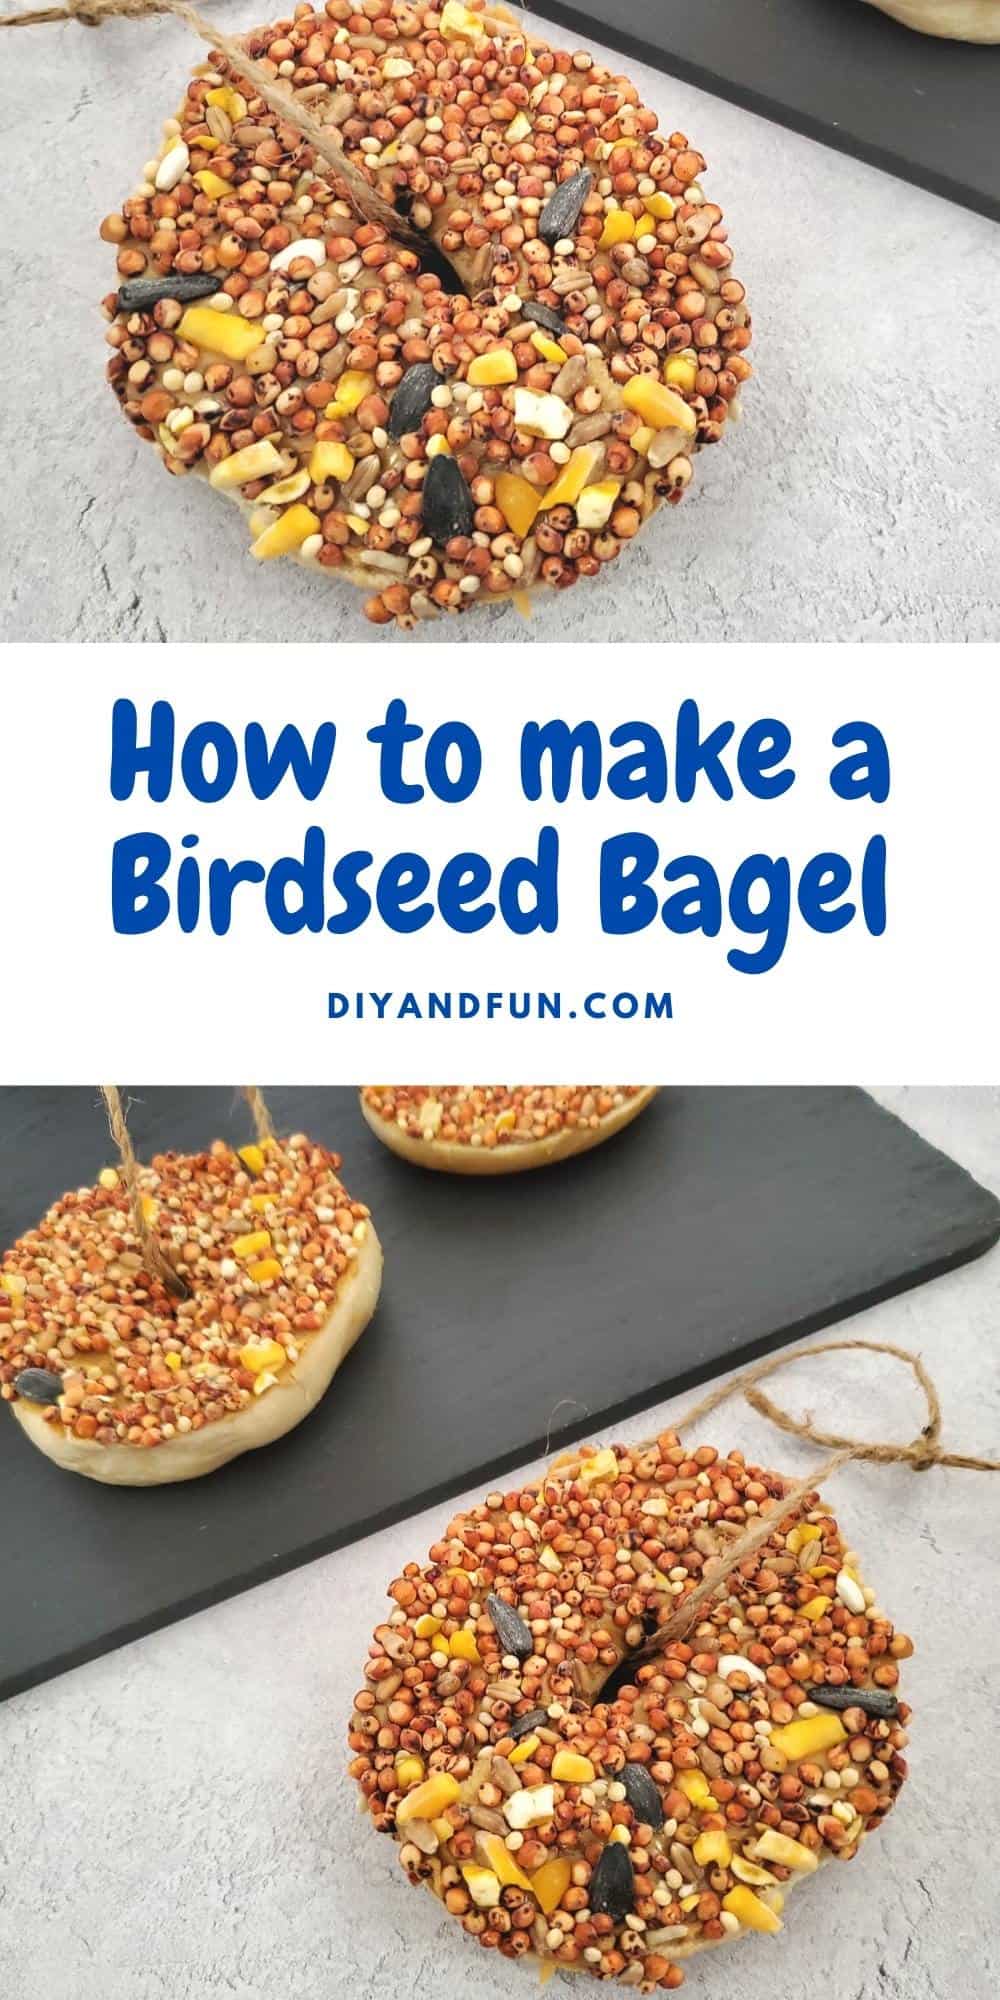 How to How to Make a Birdseed Bagel, a simple DIY craft backyard idea that is suitable for most ages and is easy to do.